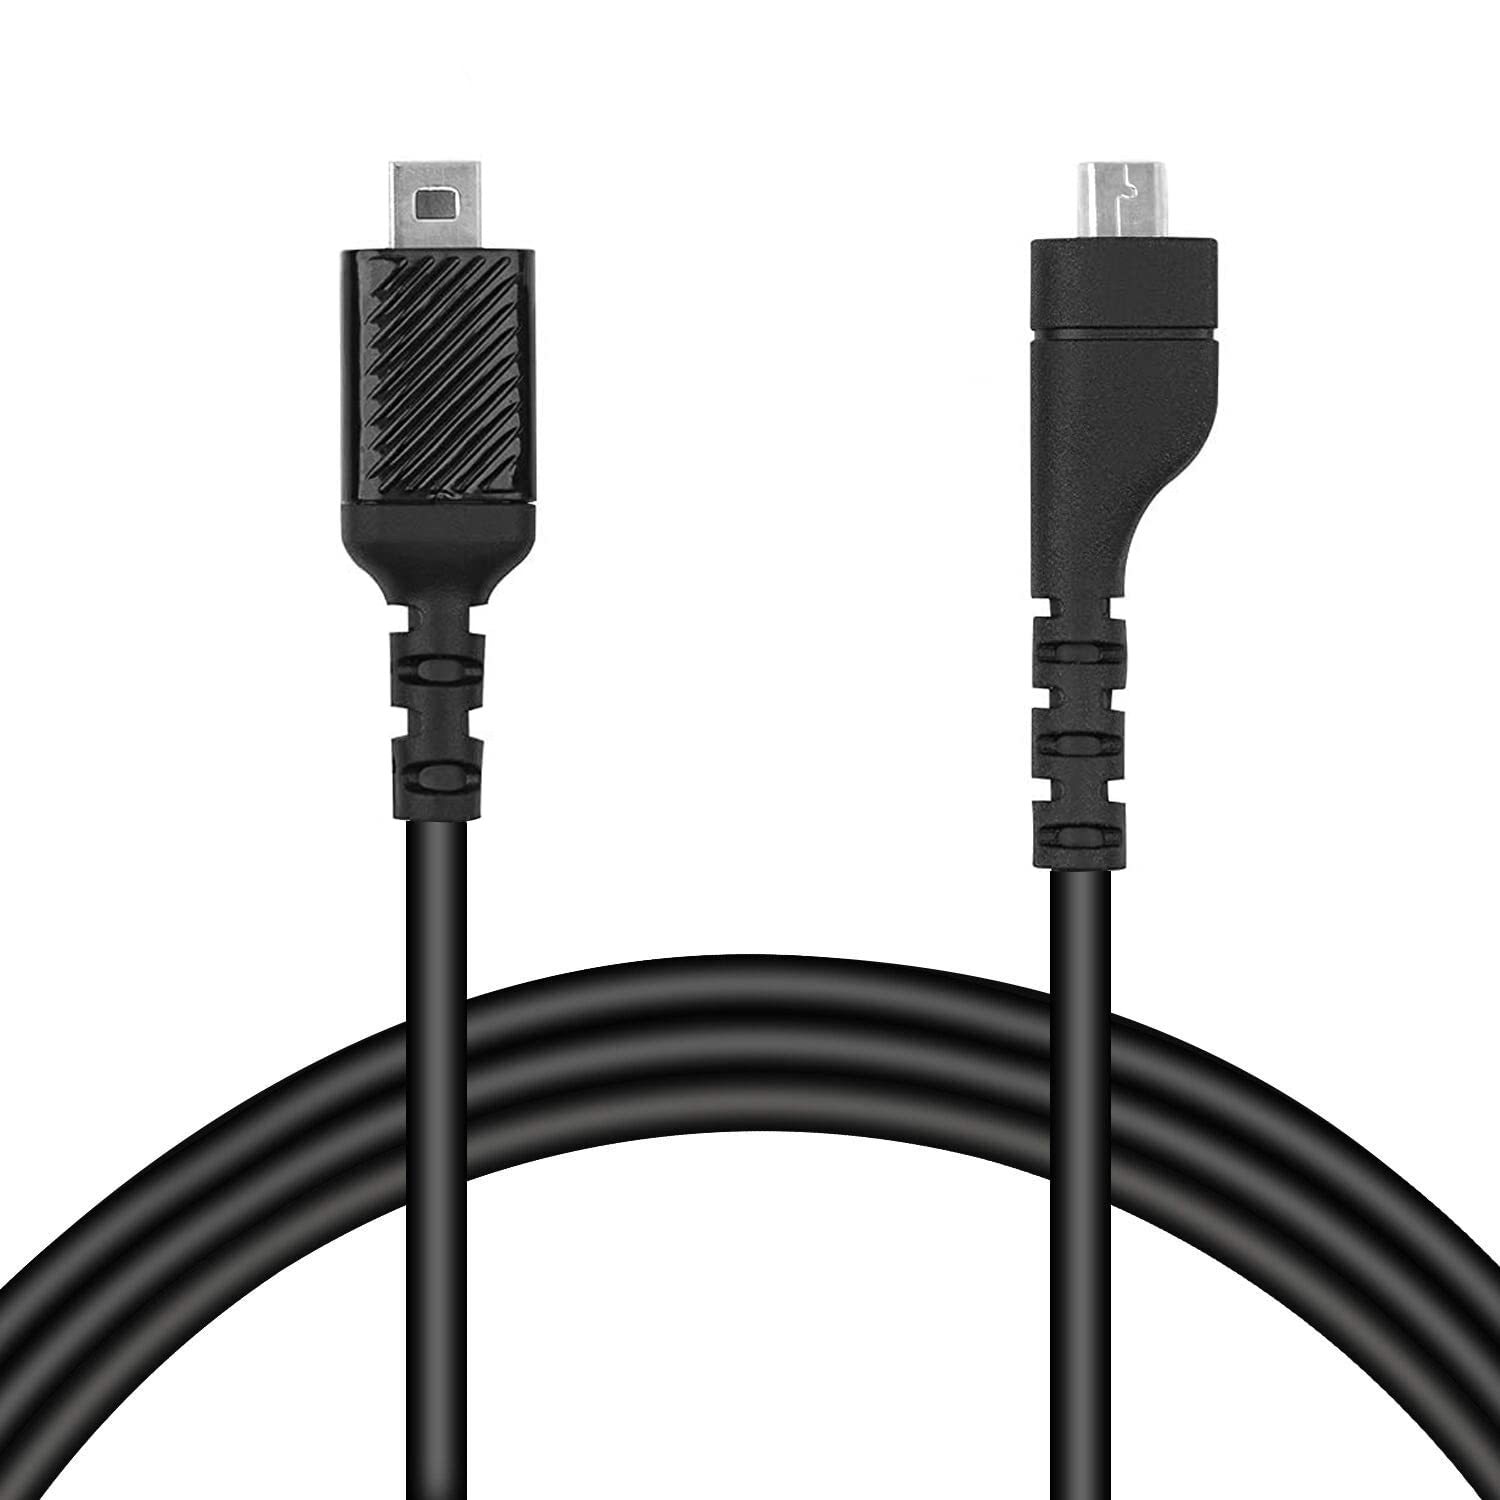 Replacement Cable Cord Compatible With Steelseries Gamdac, Sound Card, Chatmix O - $14.99